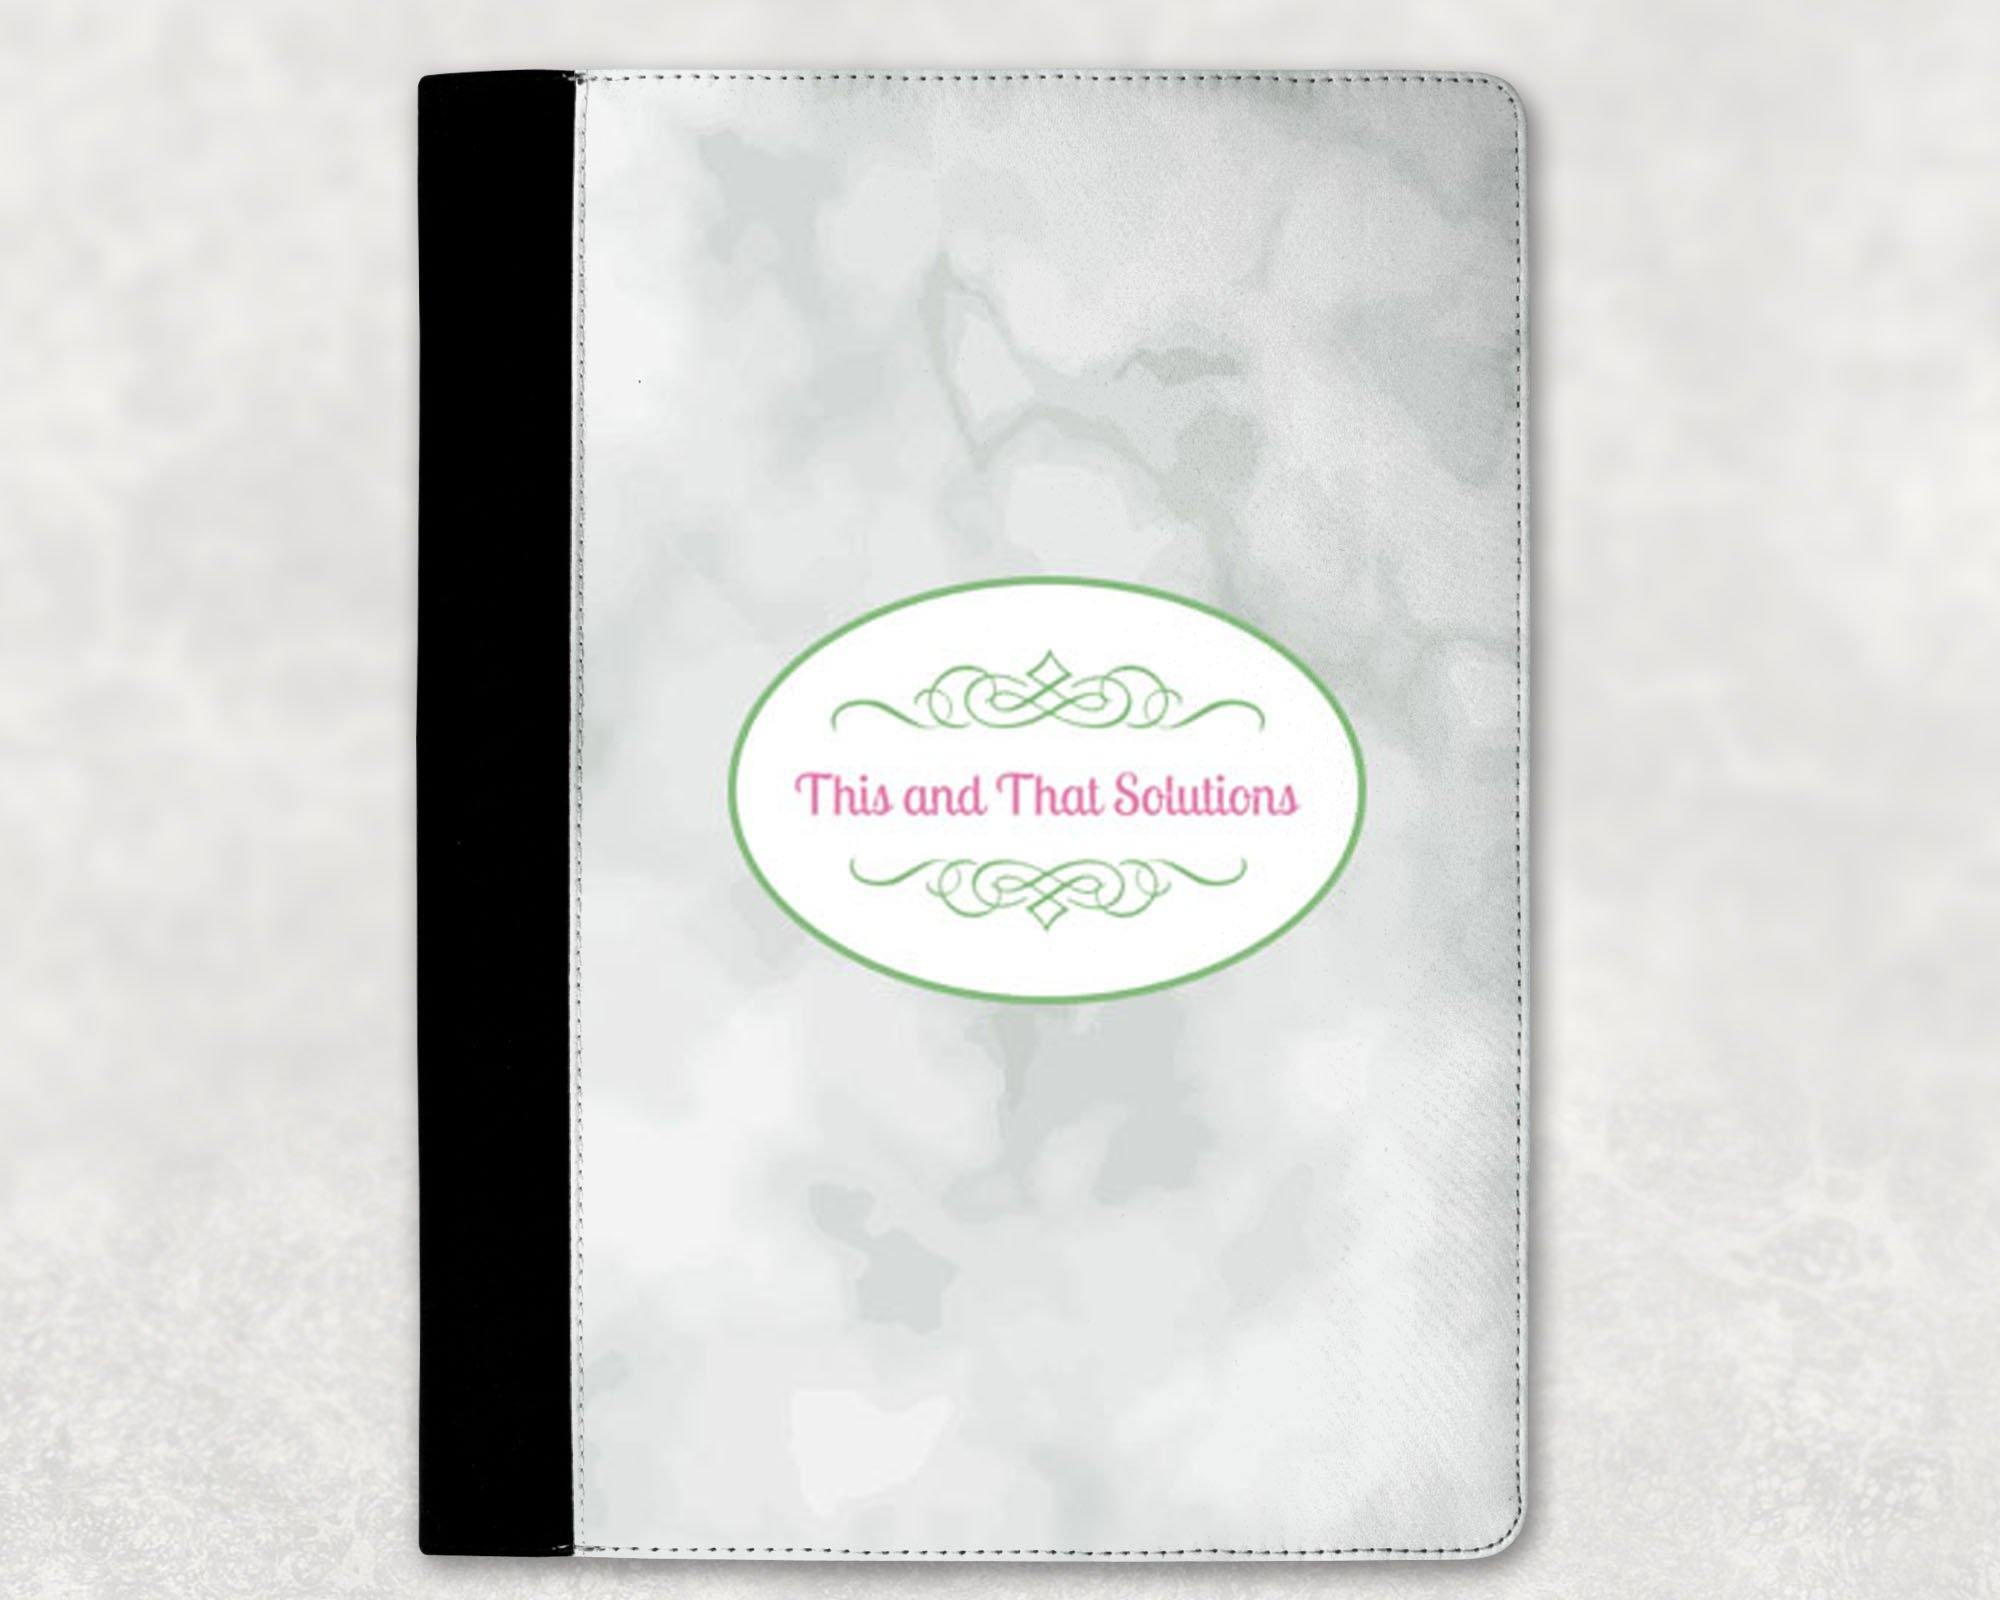 Customized Notebooks | Personalized Office Accessories | Personalized Journal | Company Logo - This & That Solutions - Customized Notebooks | Personalized Office Accessories | Personalized Journal | Company Logo - Personalized Gifts & Custom Home Decor